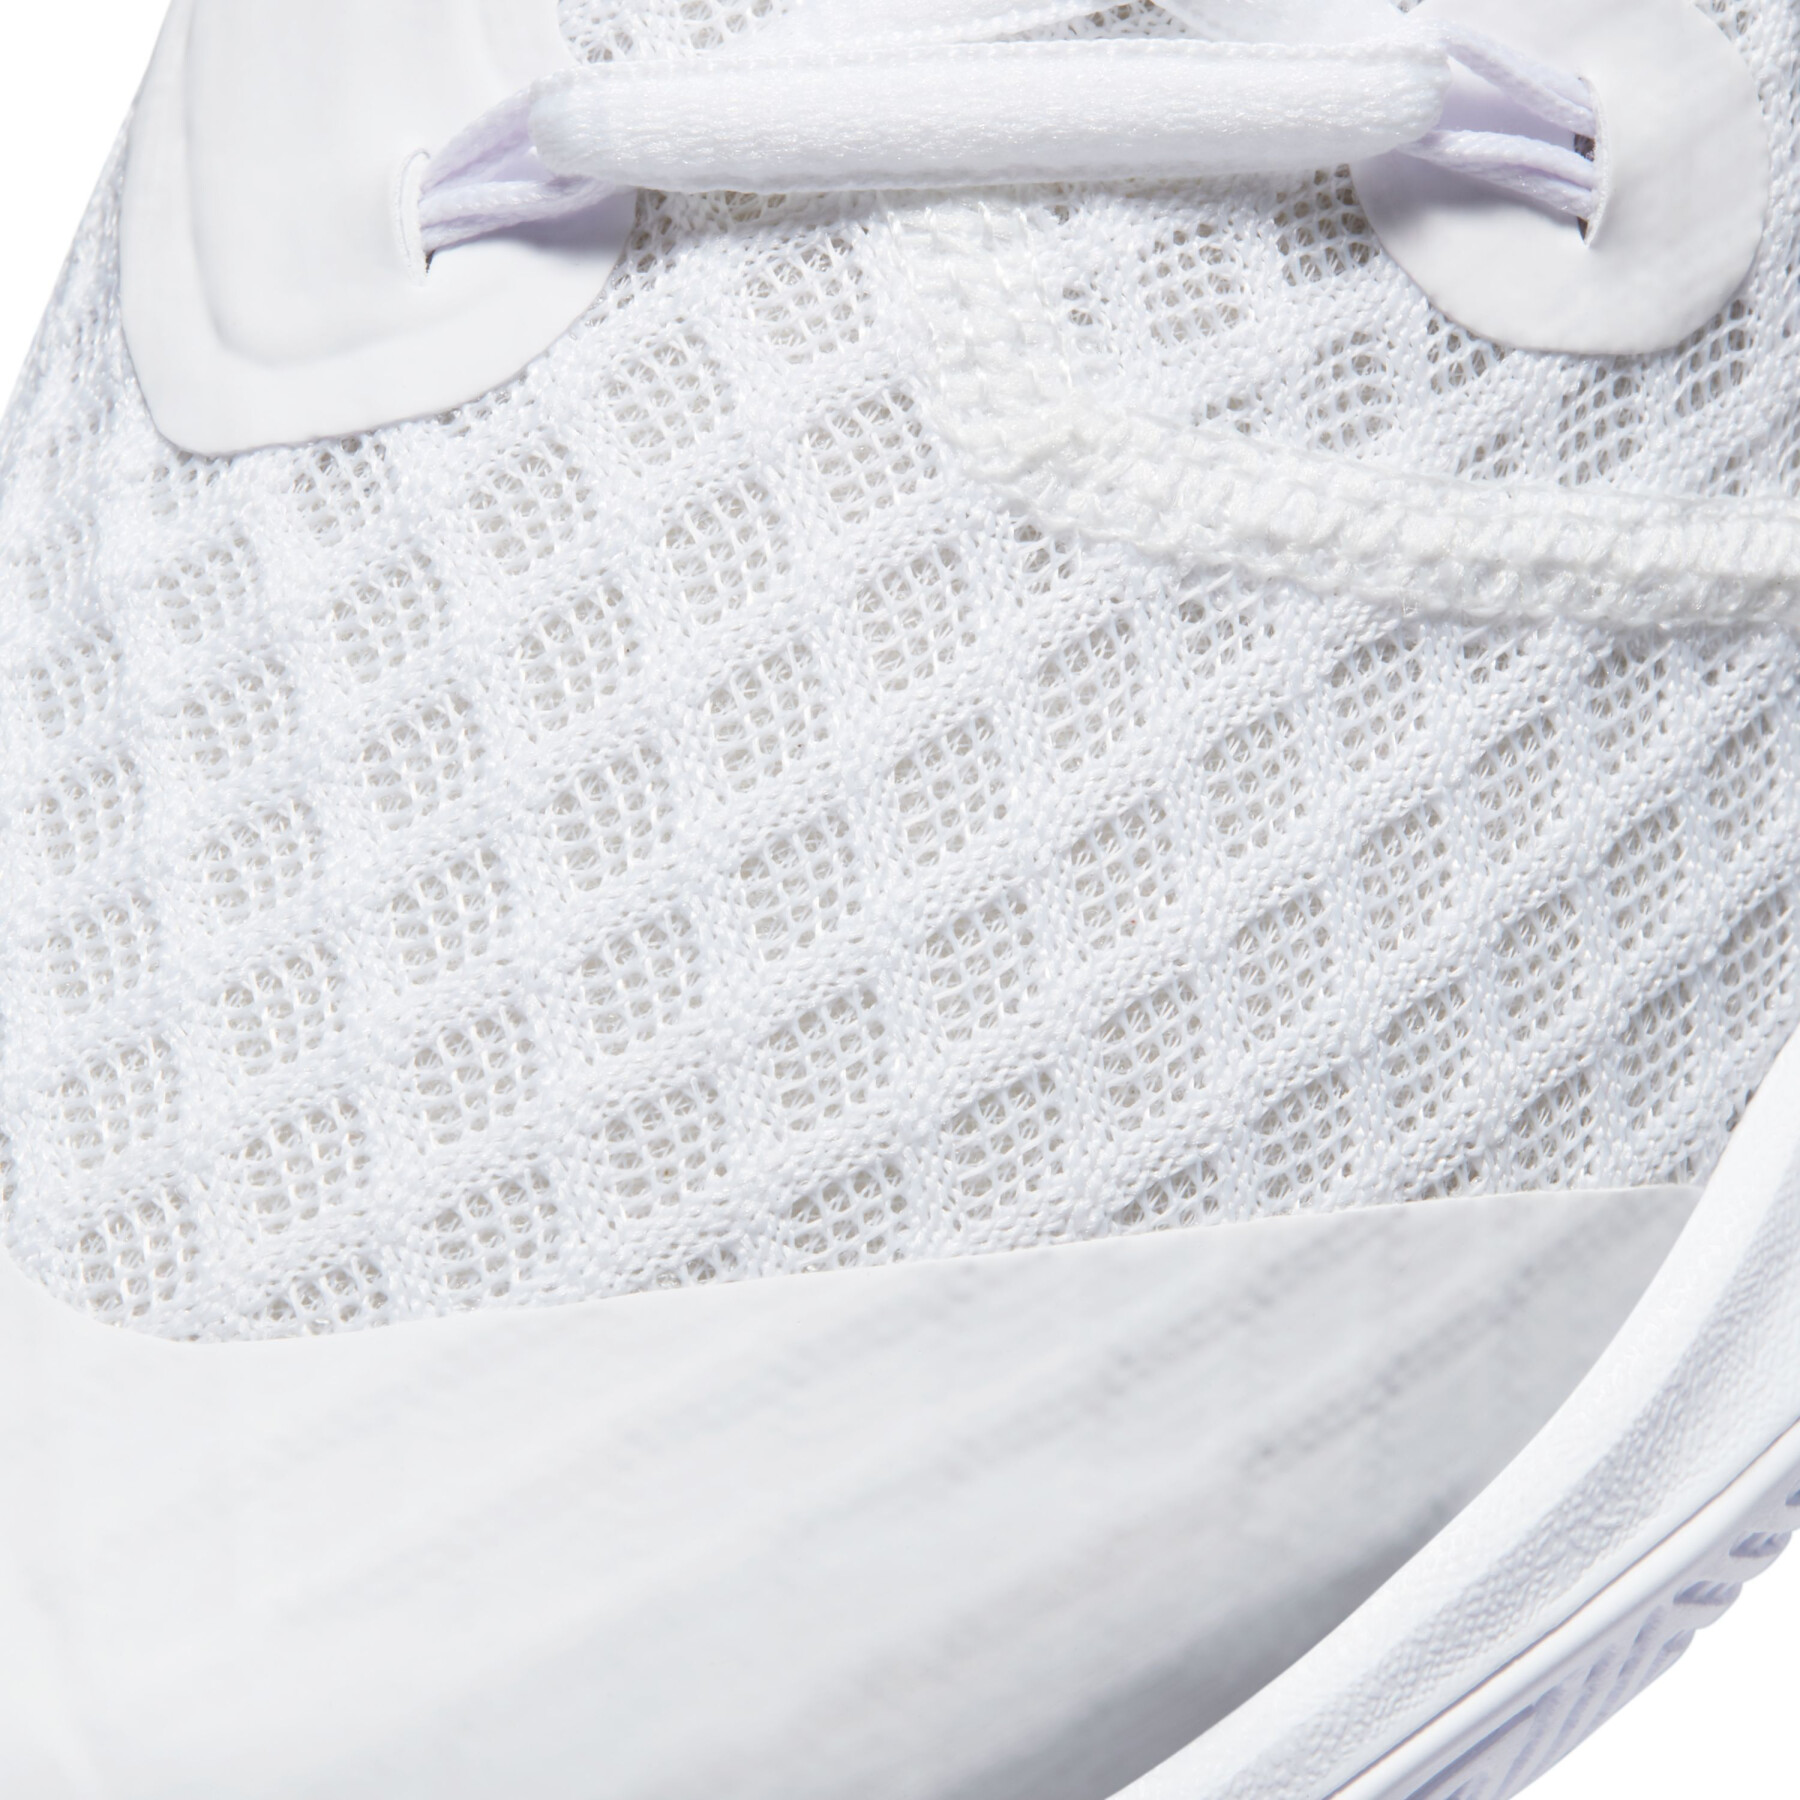 Women's shoes Nike Hyperspeed Court